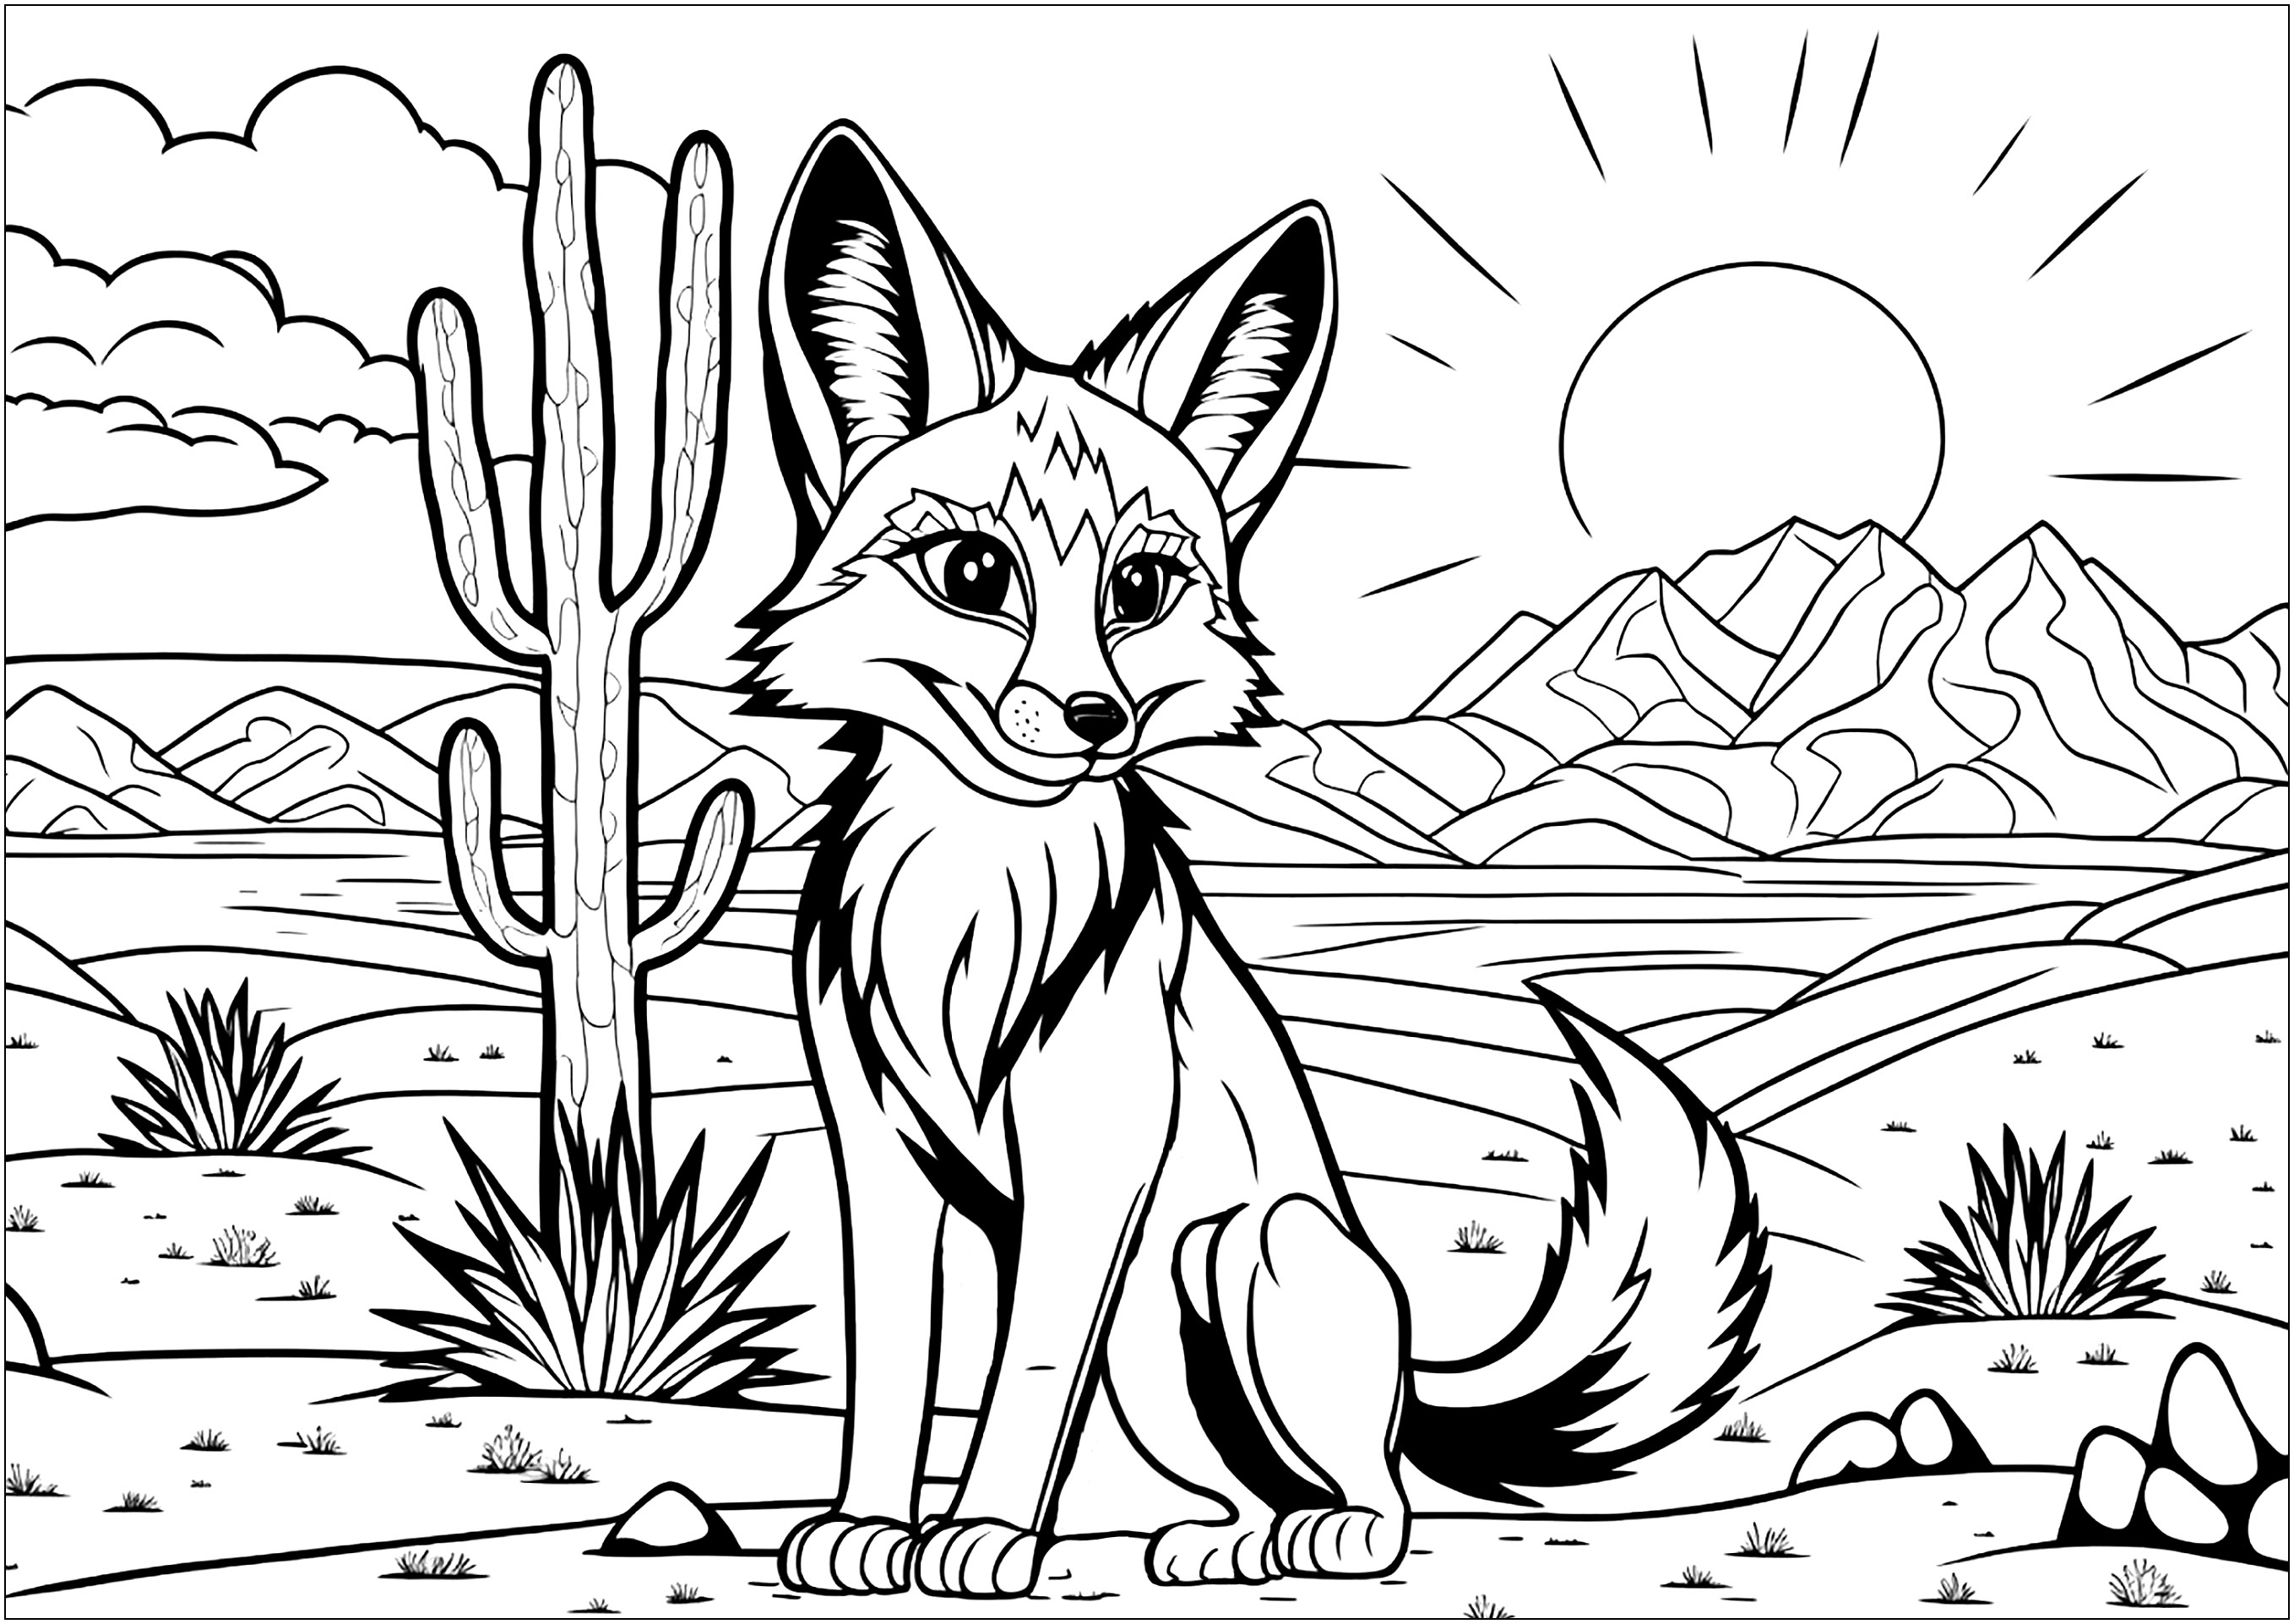 Nice fox in the desert, surrounded by cactus, with a beautiful sunset behind the mountains. Kids will be able to choose between the warm, soft colors of the desert and the bright, intense colors of the sunset. They will be able to create unique and creative tones and shades for their coloring.